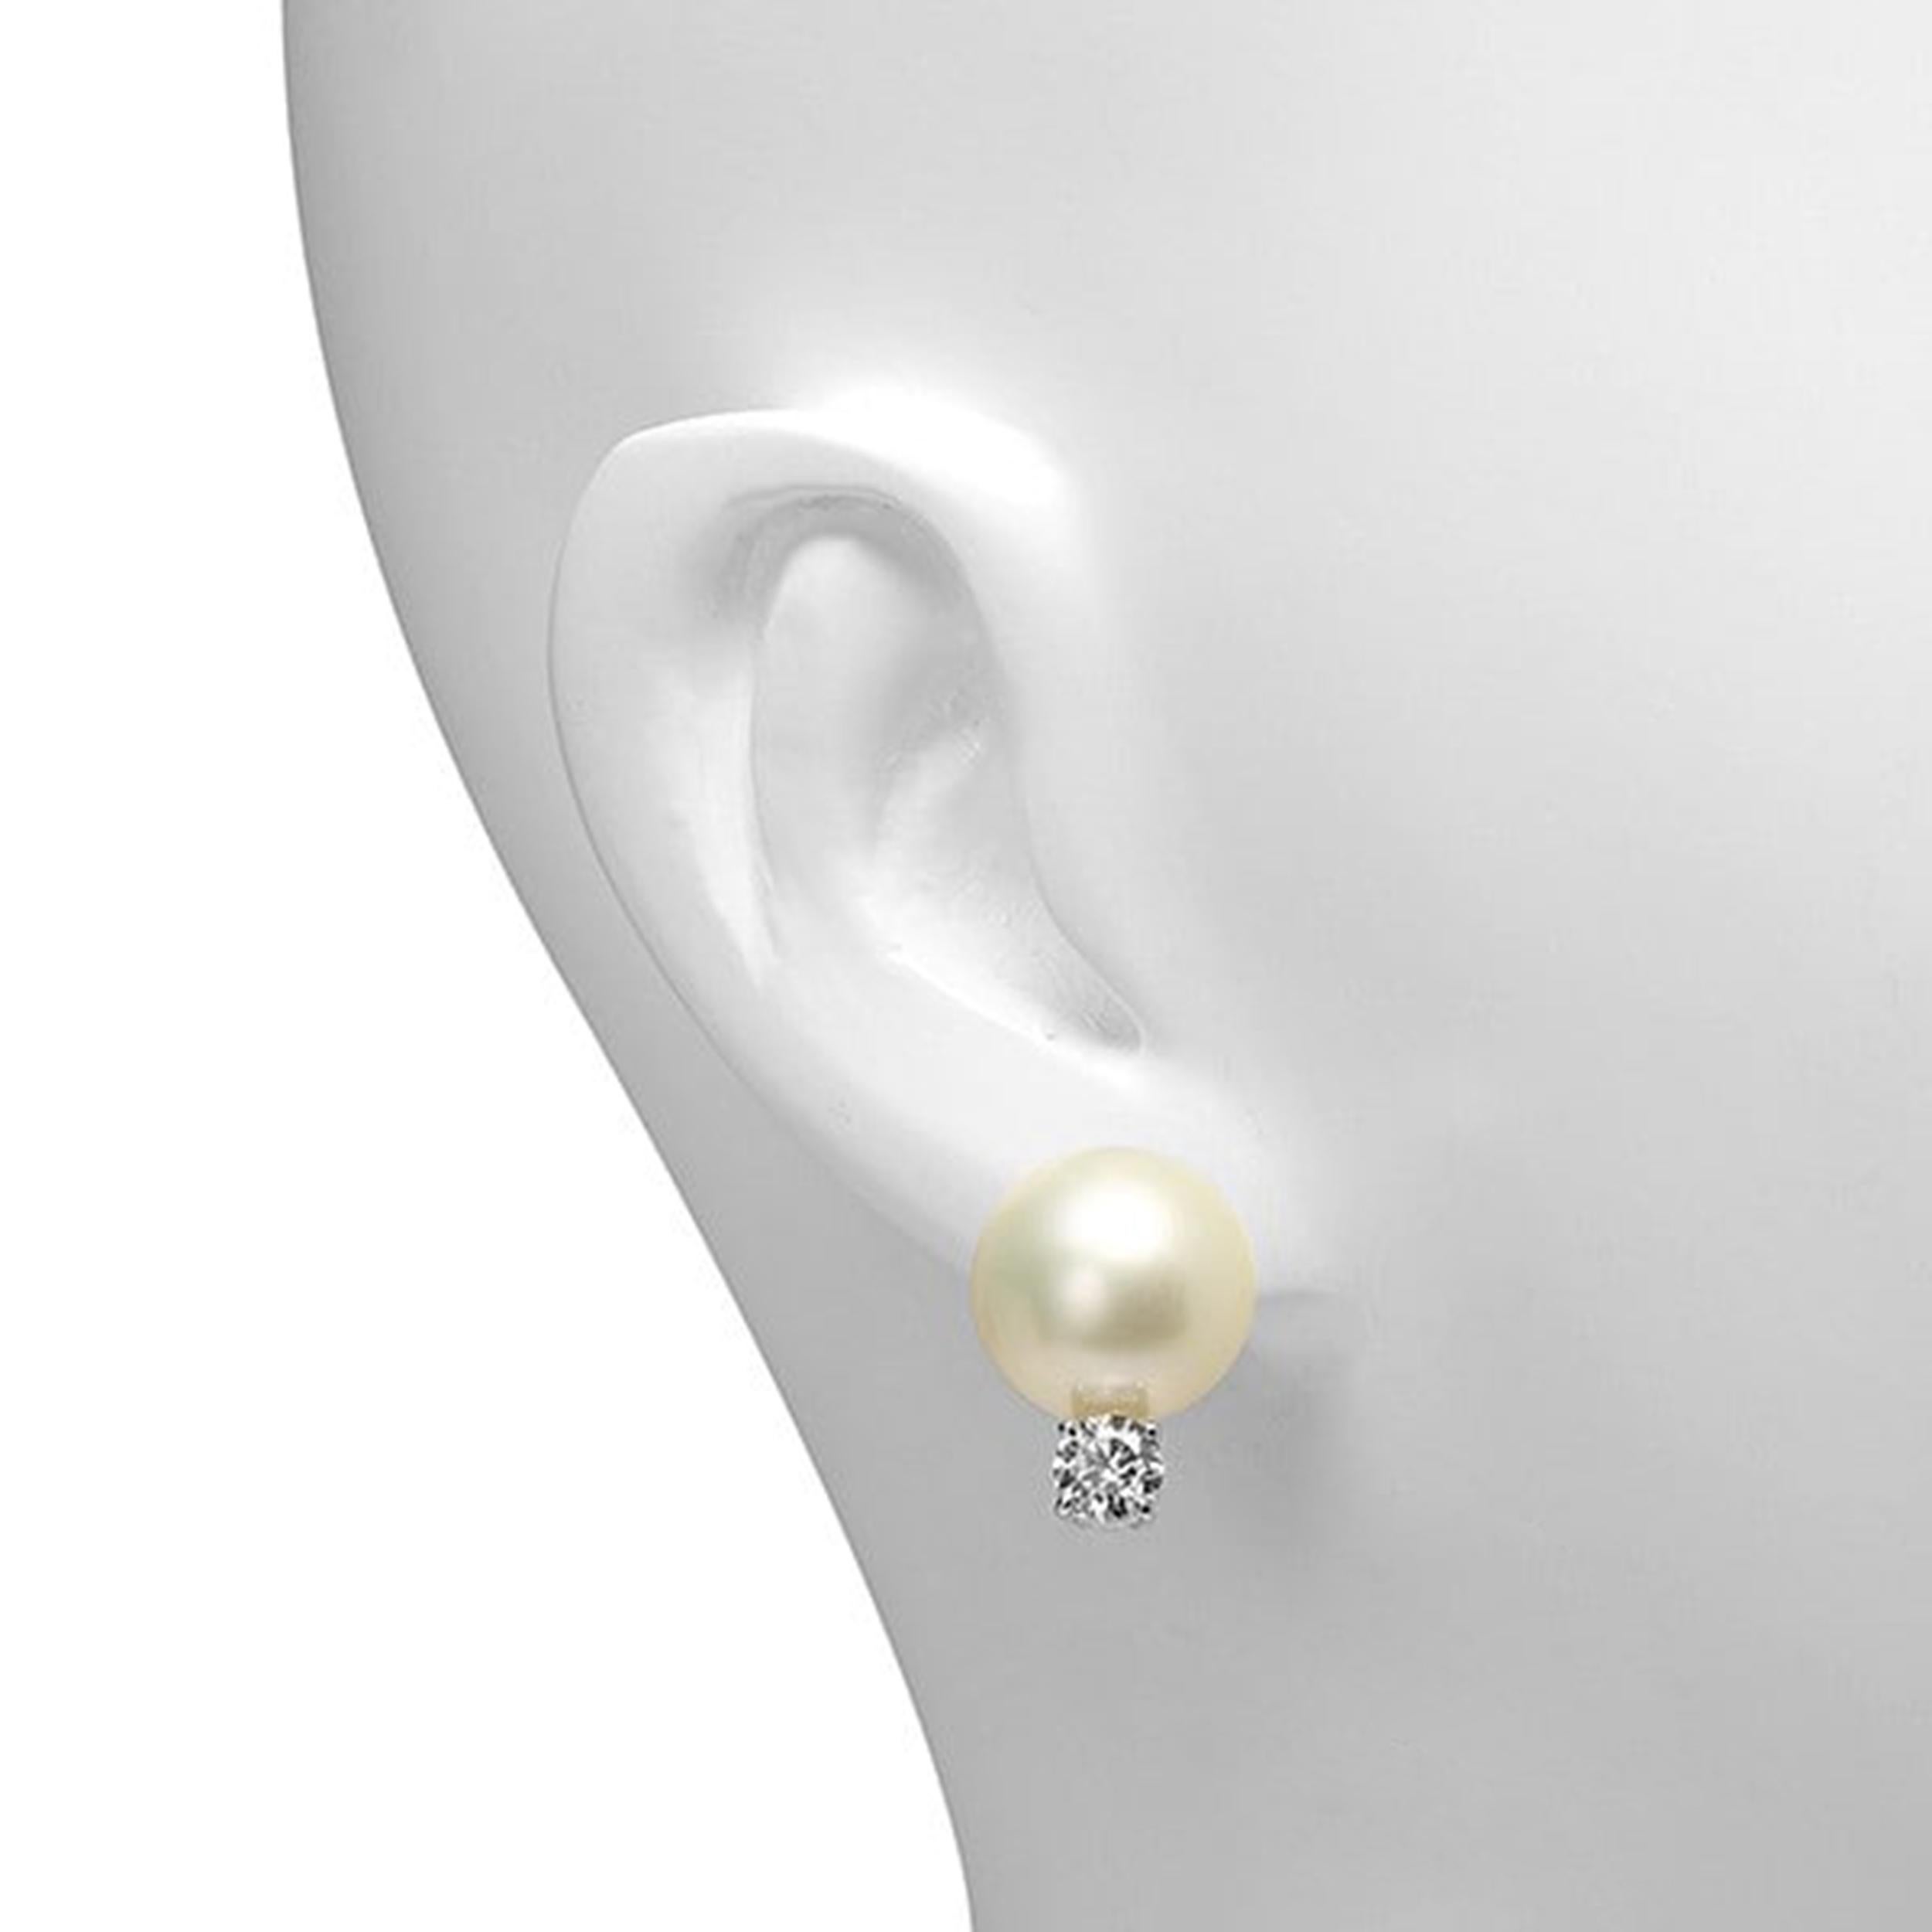 Round Cut Platinum Diamond Pearl Earrings  0.526ct & 0.505ct Diamonds  13.6mm Pearls For Sale